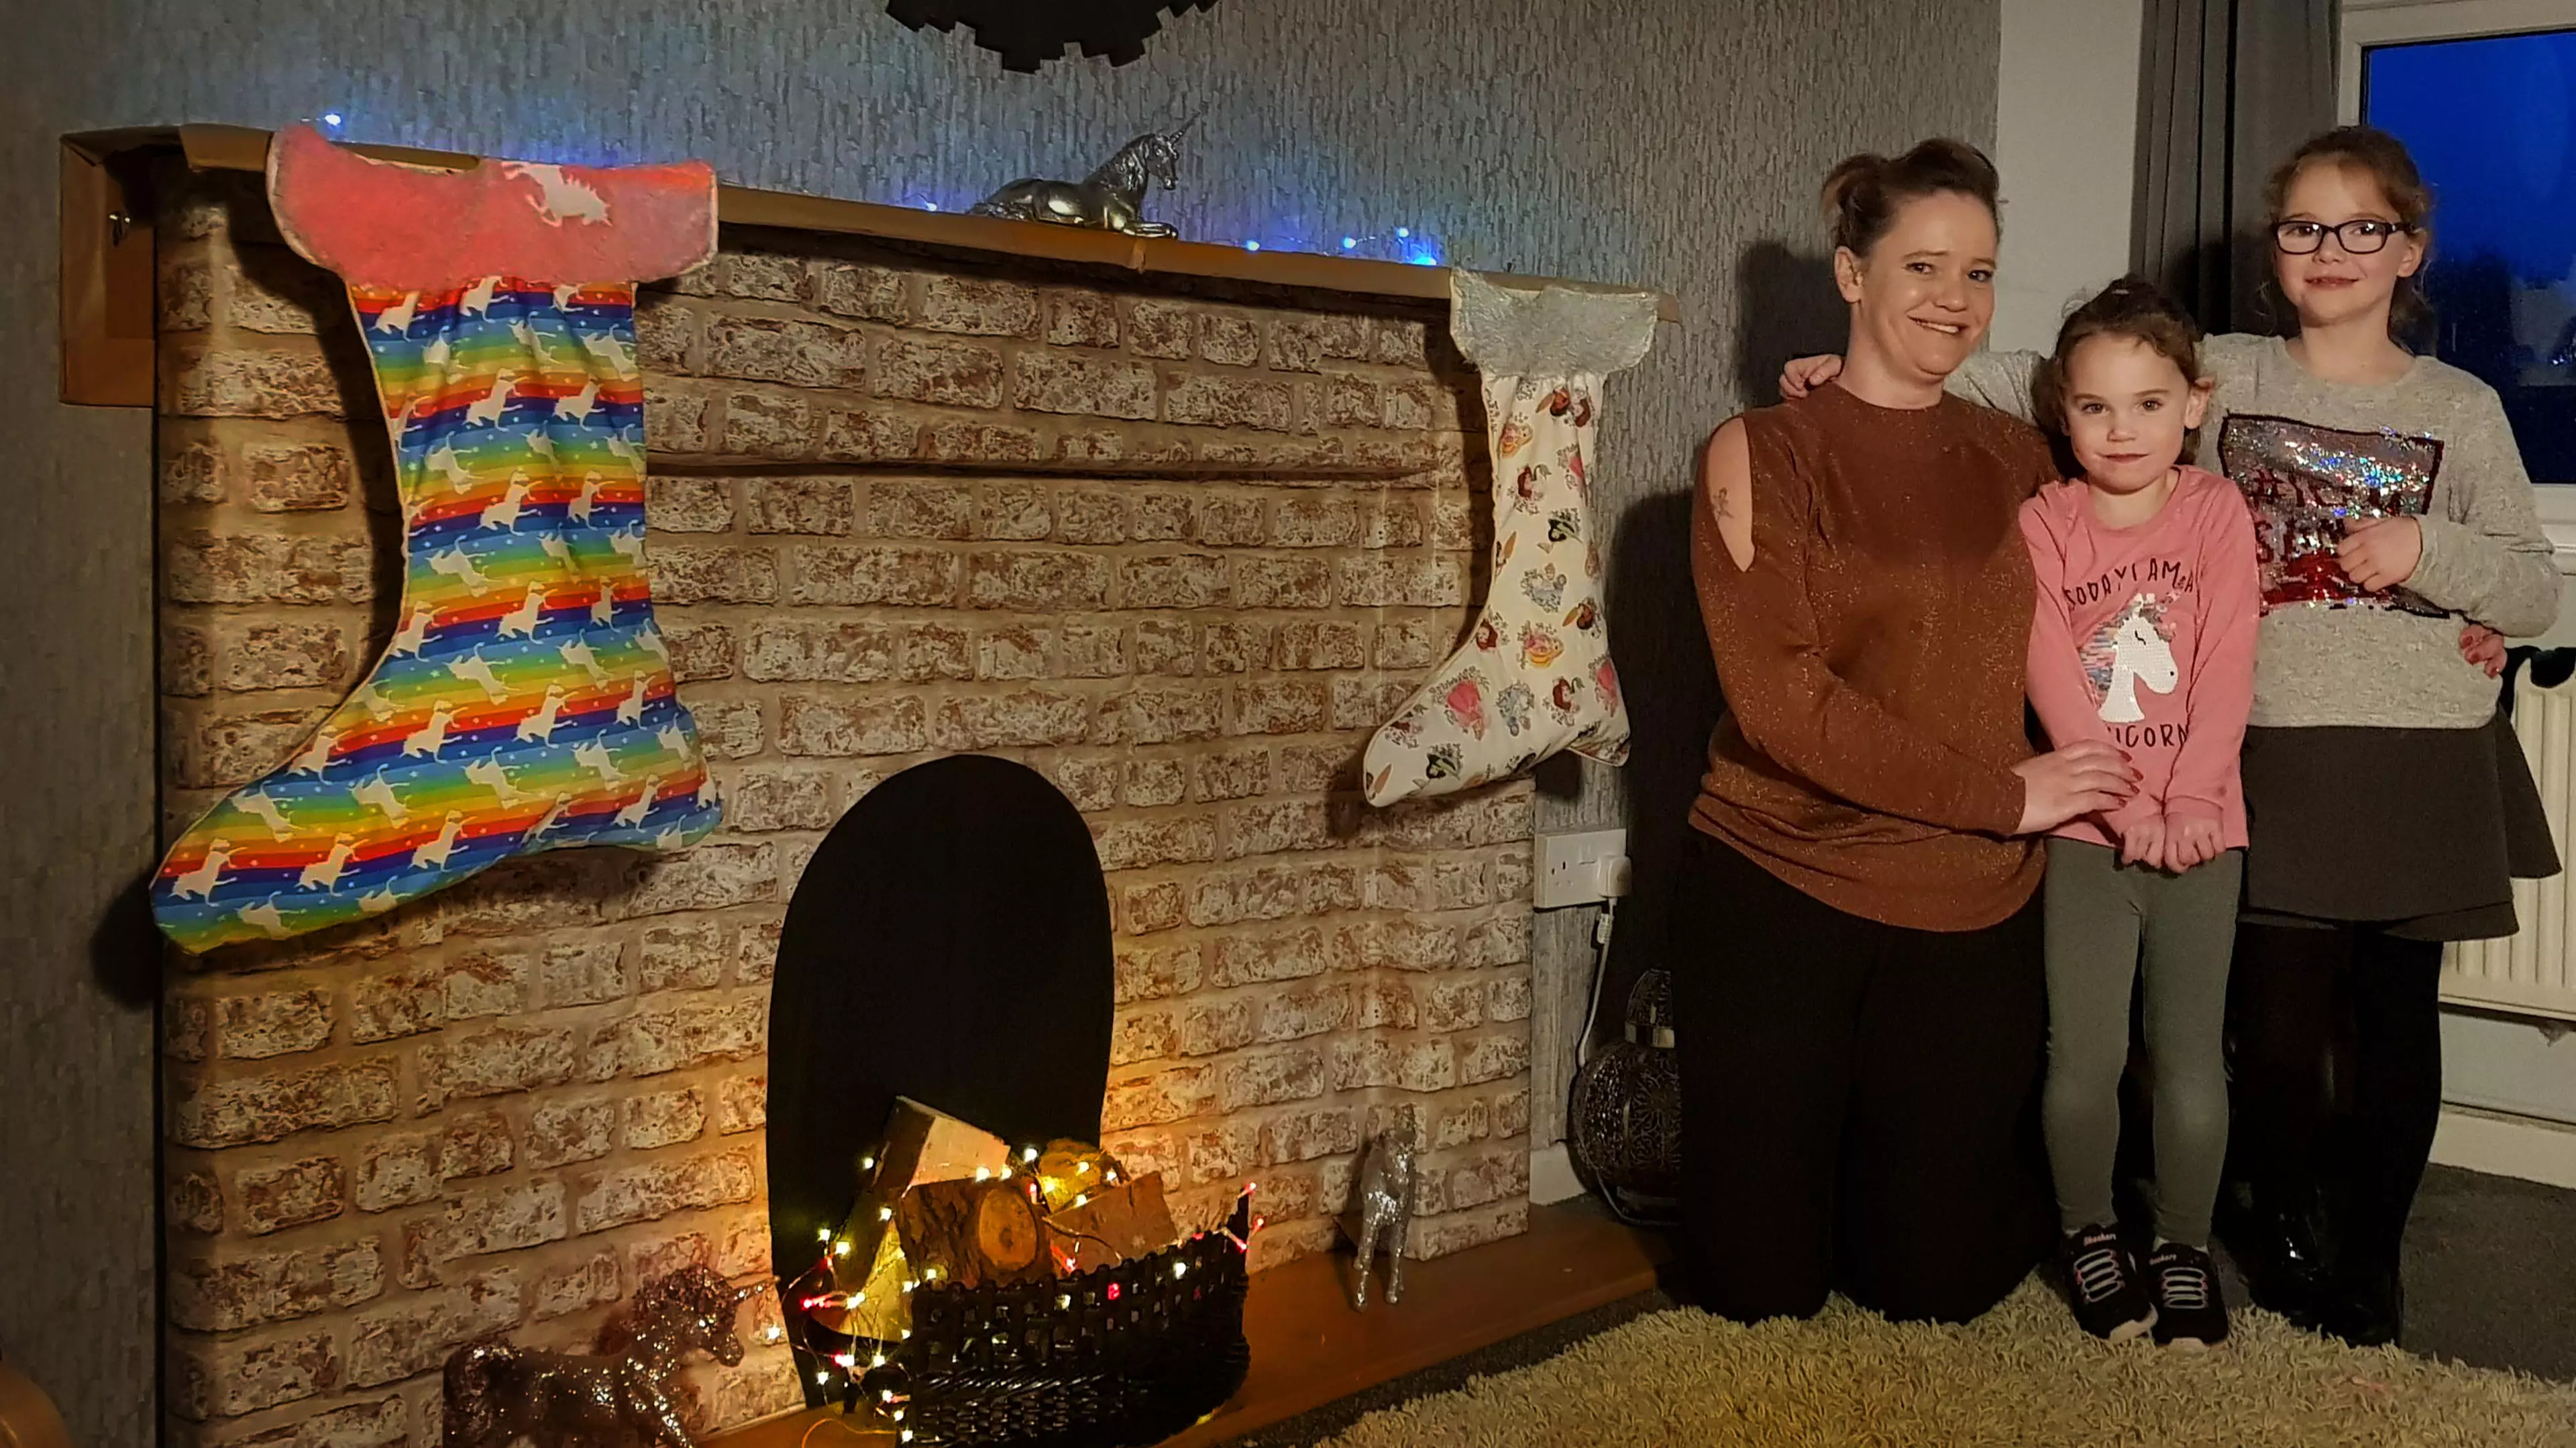 Woman Creates Own Fireplace For Just £2 So Her Kids Can Hang Stockings This Christmas